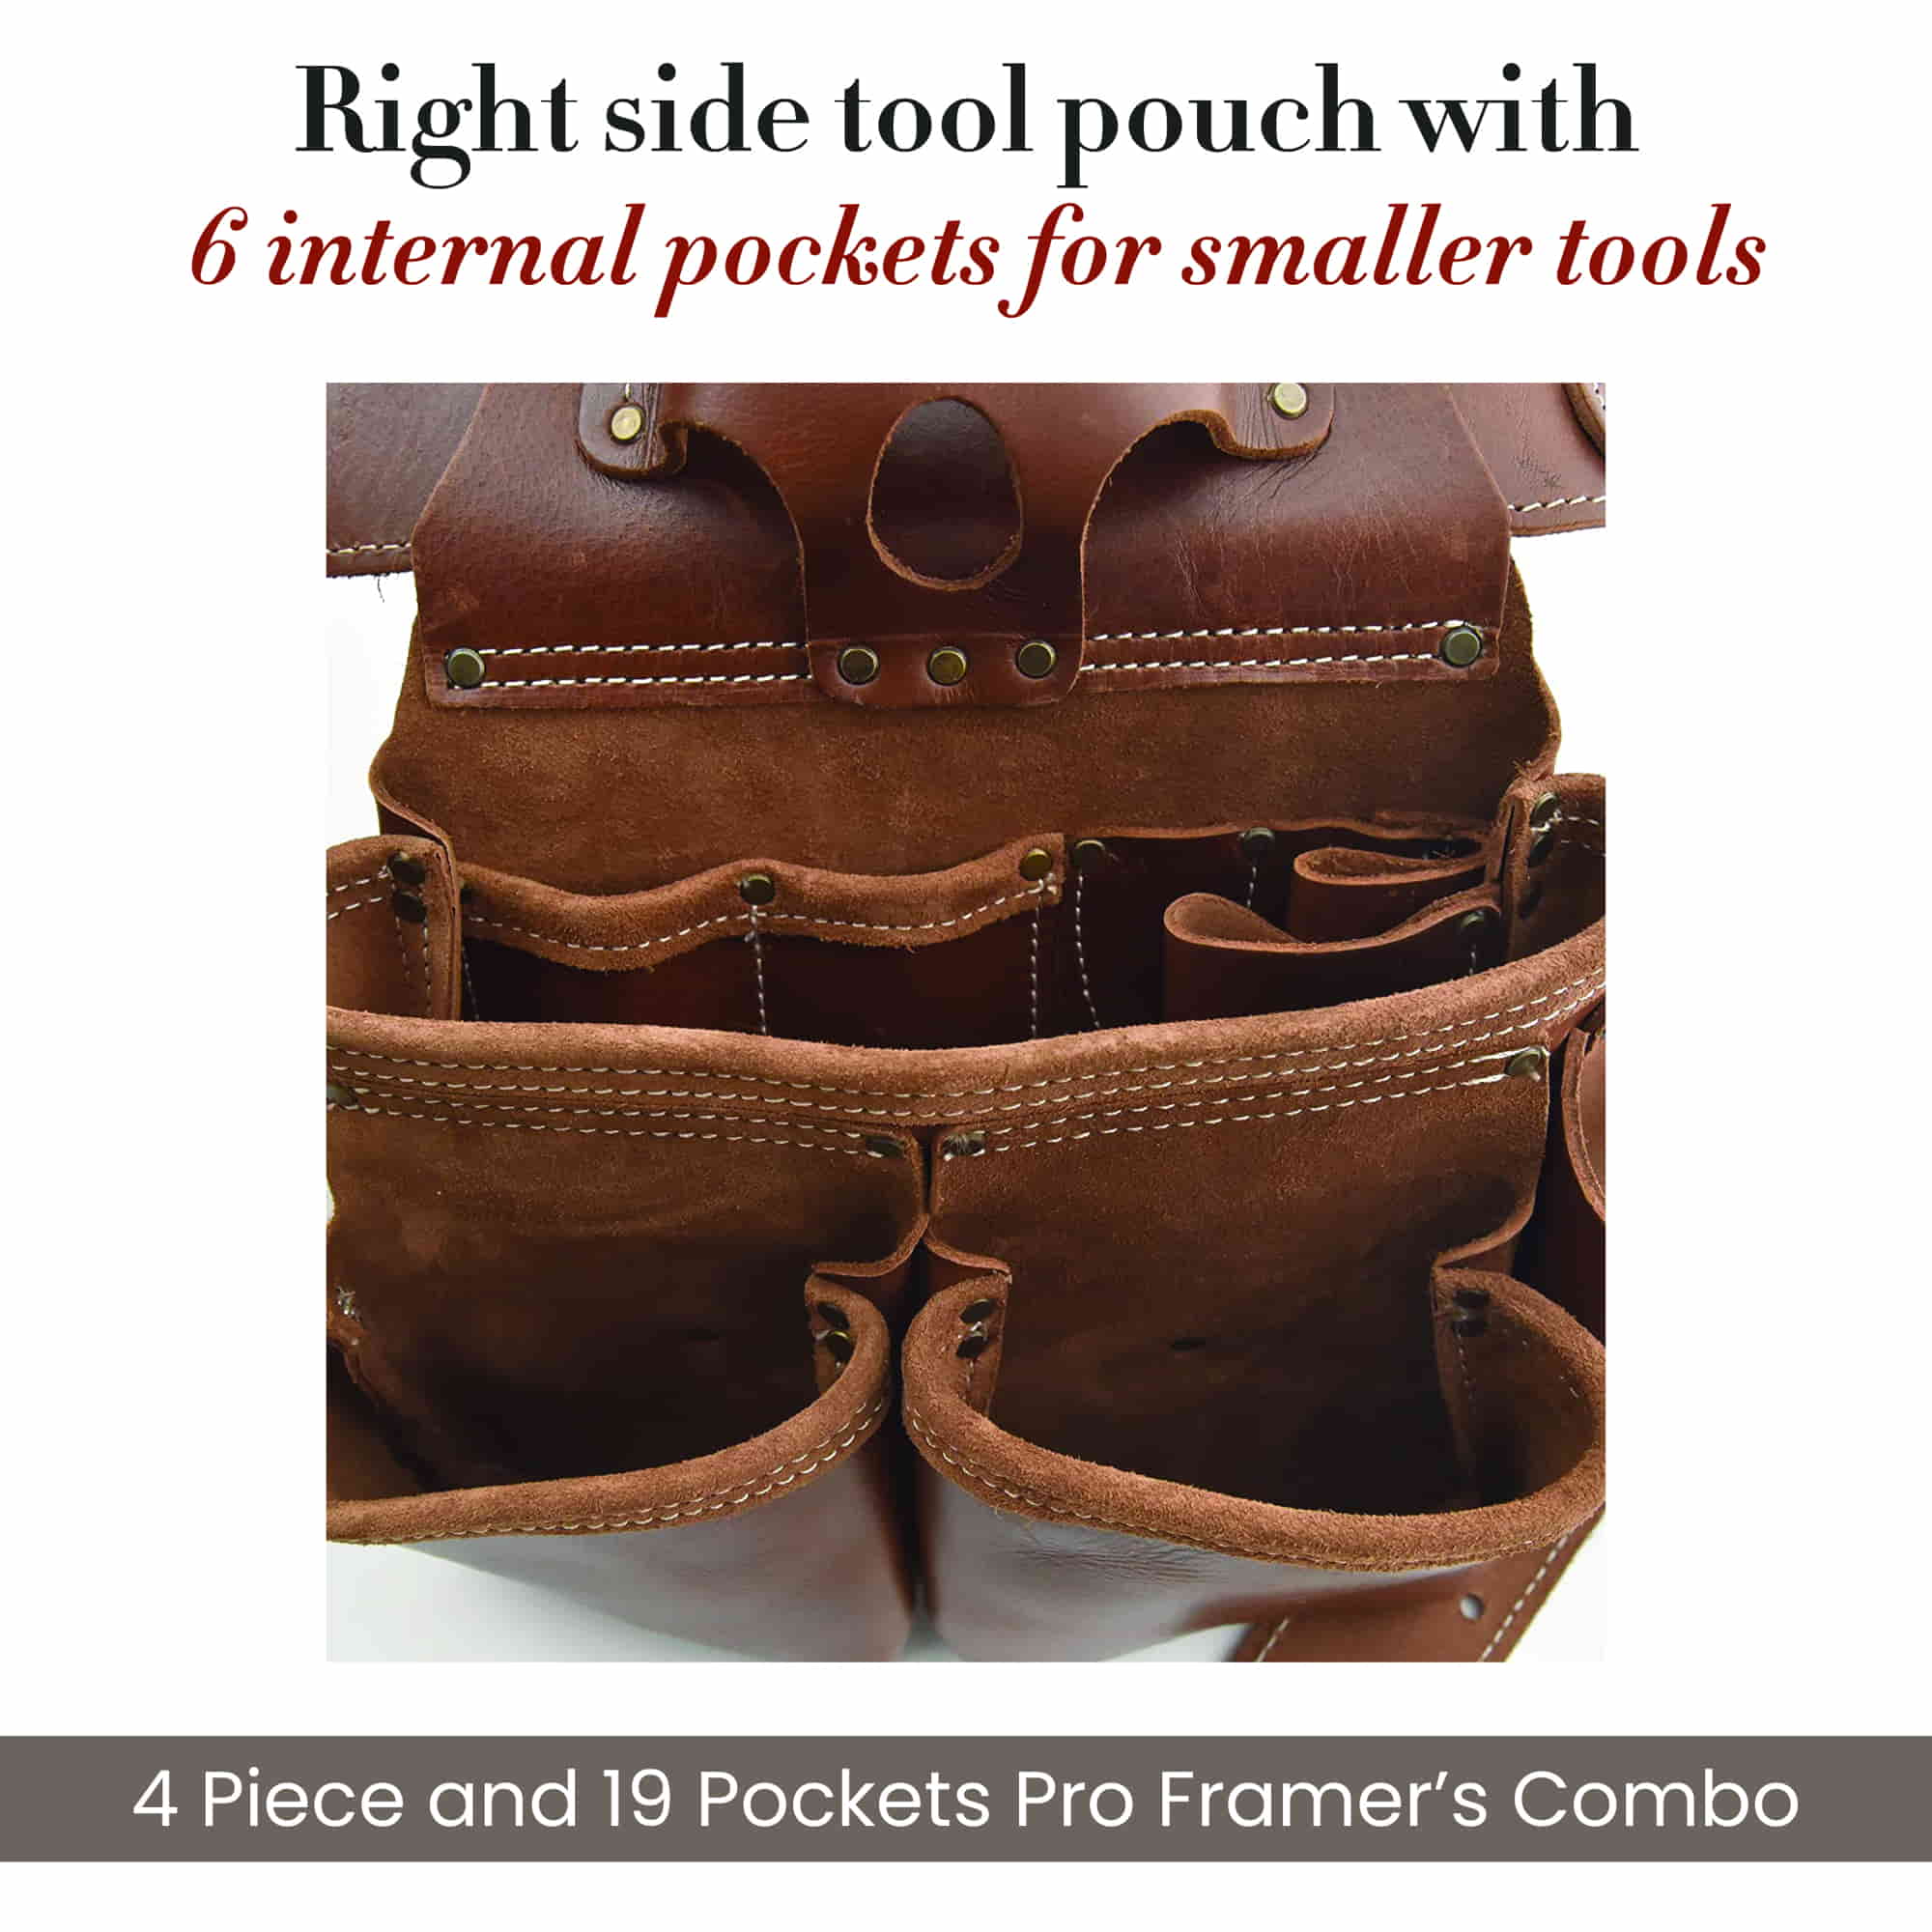 98444 - 4 Piece 19 Pocket Framer's Combo in Grain Leather | Style n Craft